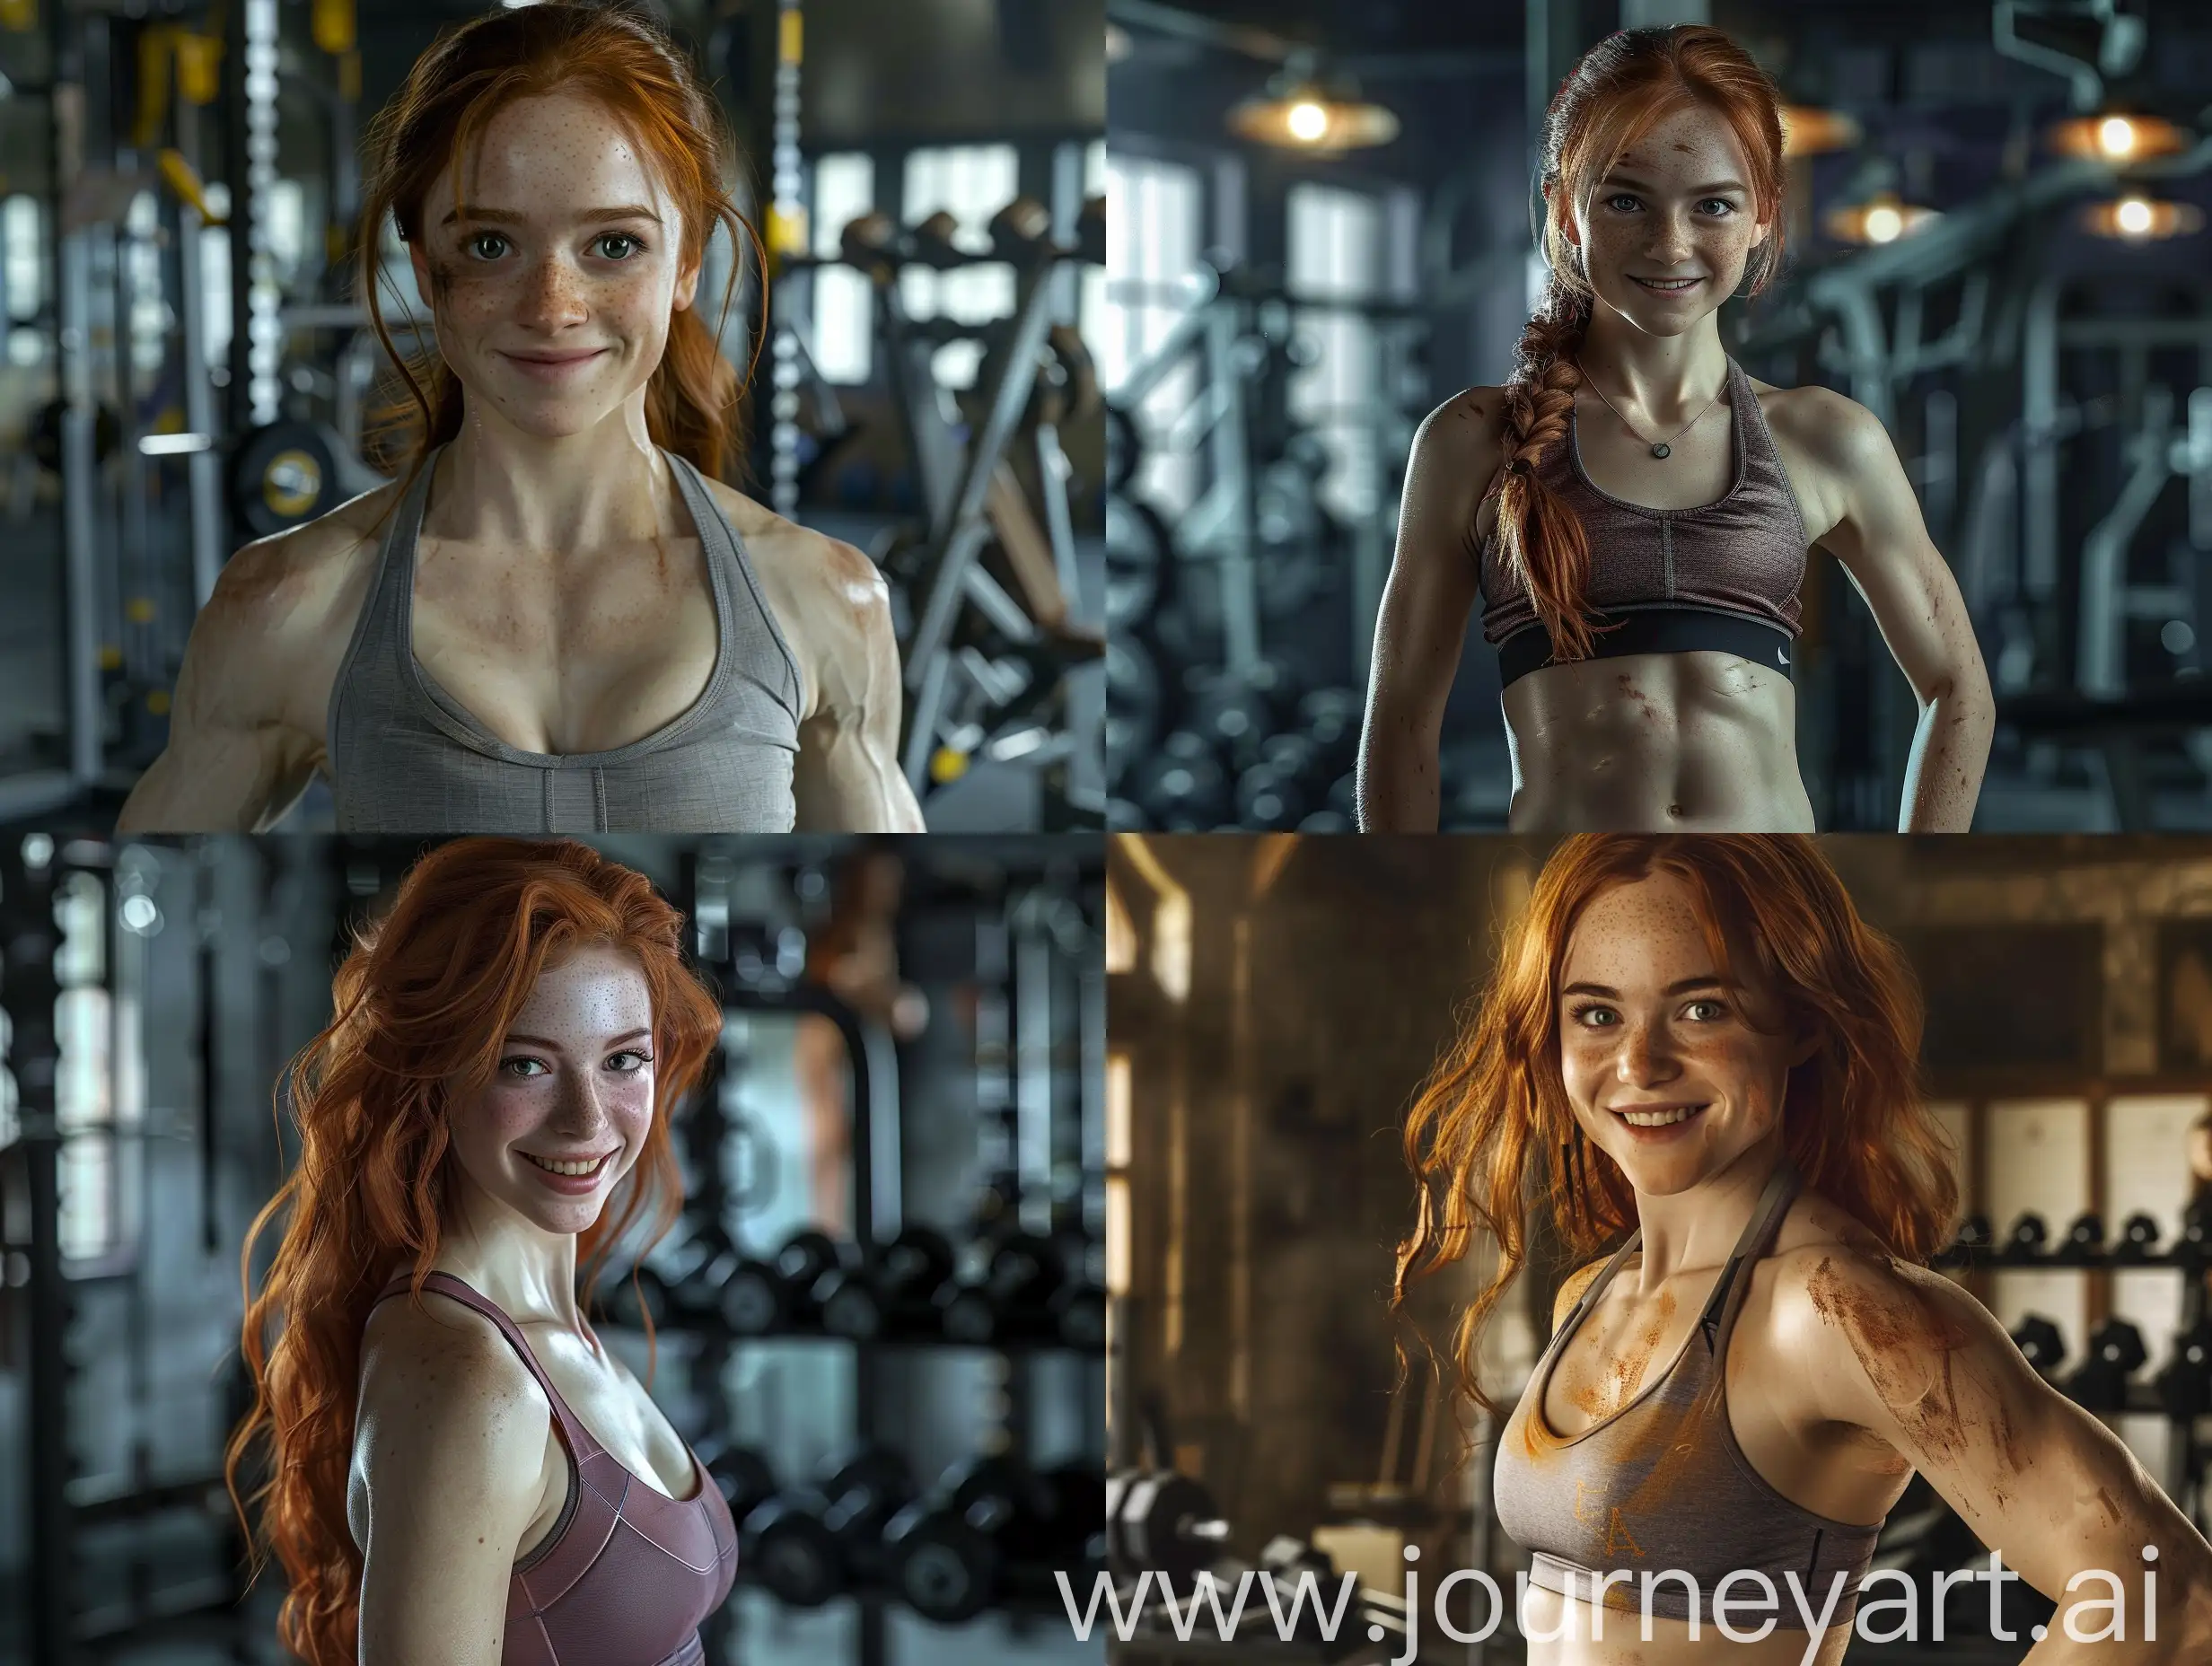 The character of Ginny Weasley from the movie Harry Potter, with a fit and muscular body, wearing sportswear, half body, looking at camera, With an authoritative smile, wizards gym background, realistic, cinematic lighting, q2